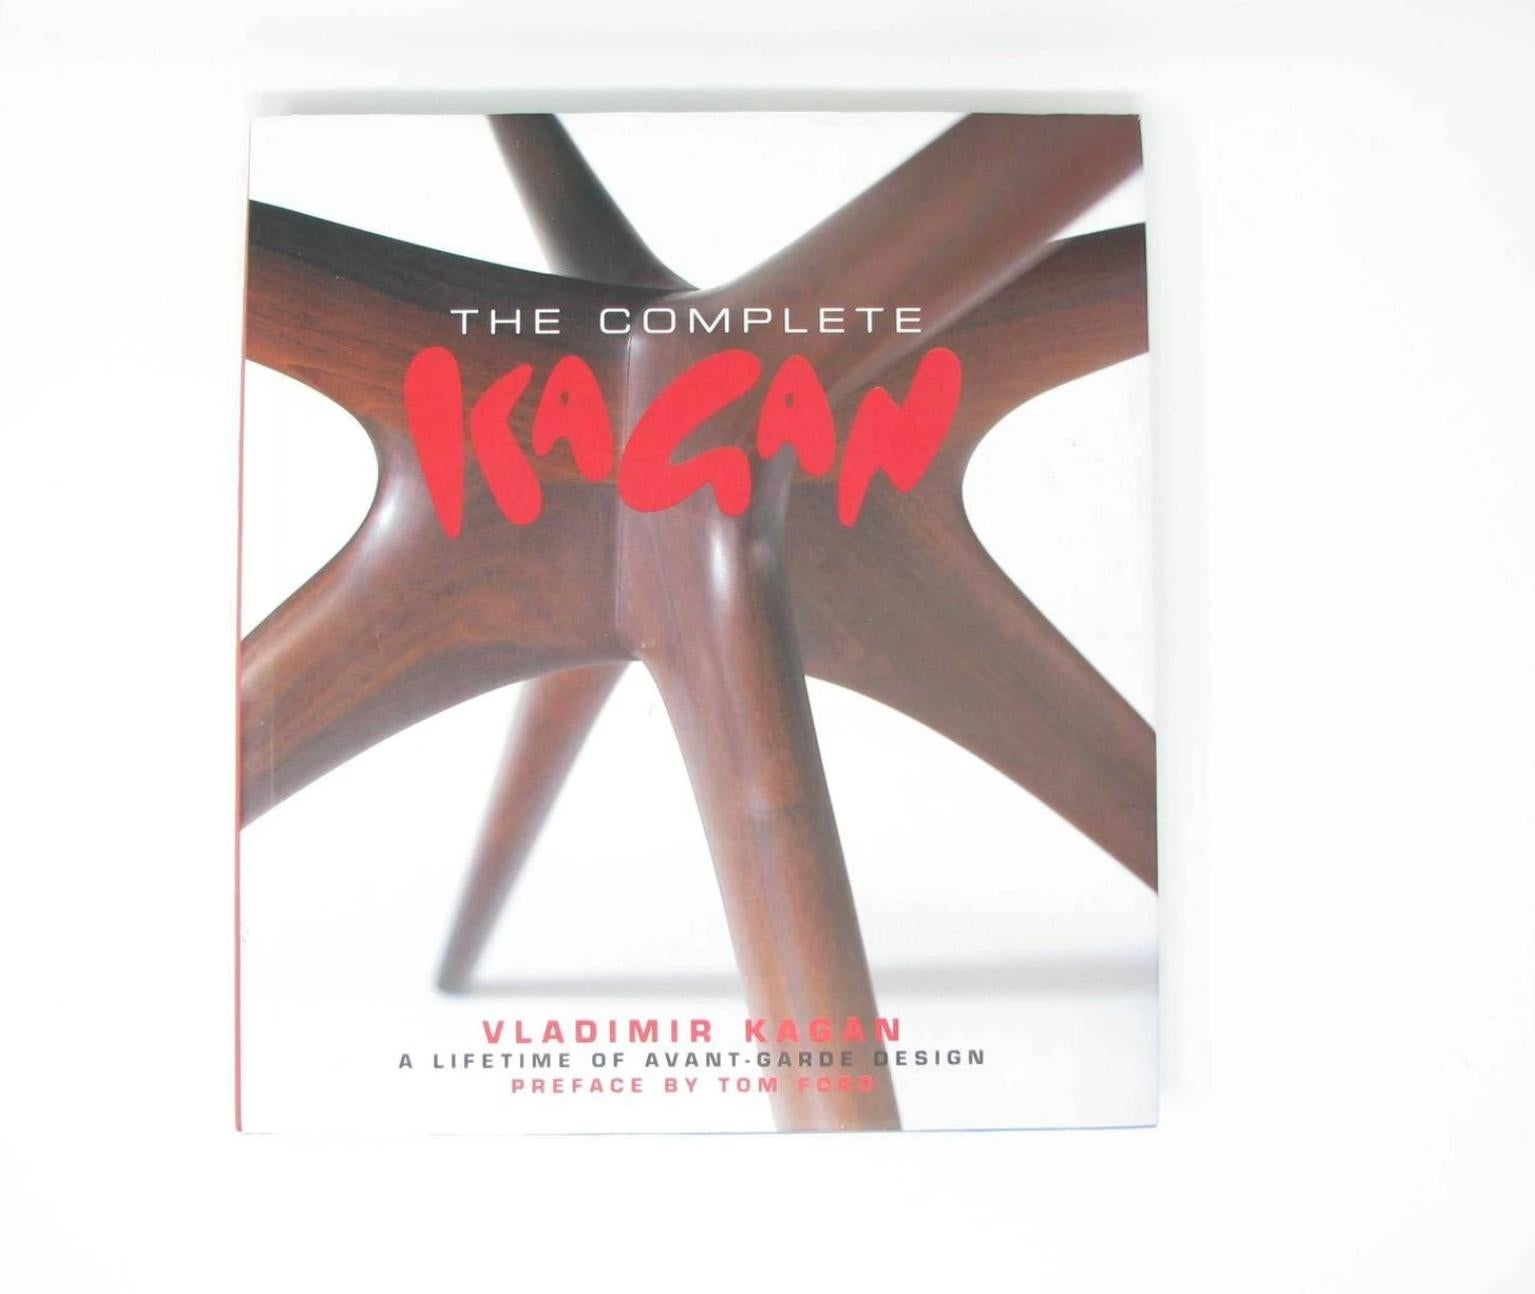 The Complete Kagan: Vladimir Kagan — A Lifetime of Avant-Garde Design. First edition. Signed by Kagan. Excellent condition. Hardback. 1st complete compendium of Kagan's life and work and includes dozens of never before published photographs and